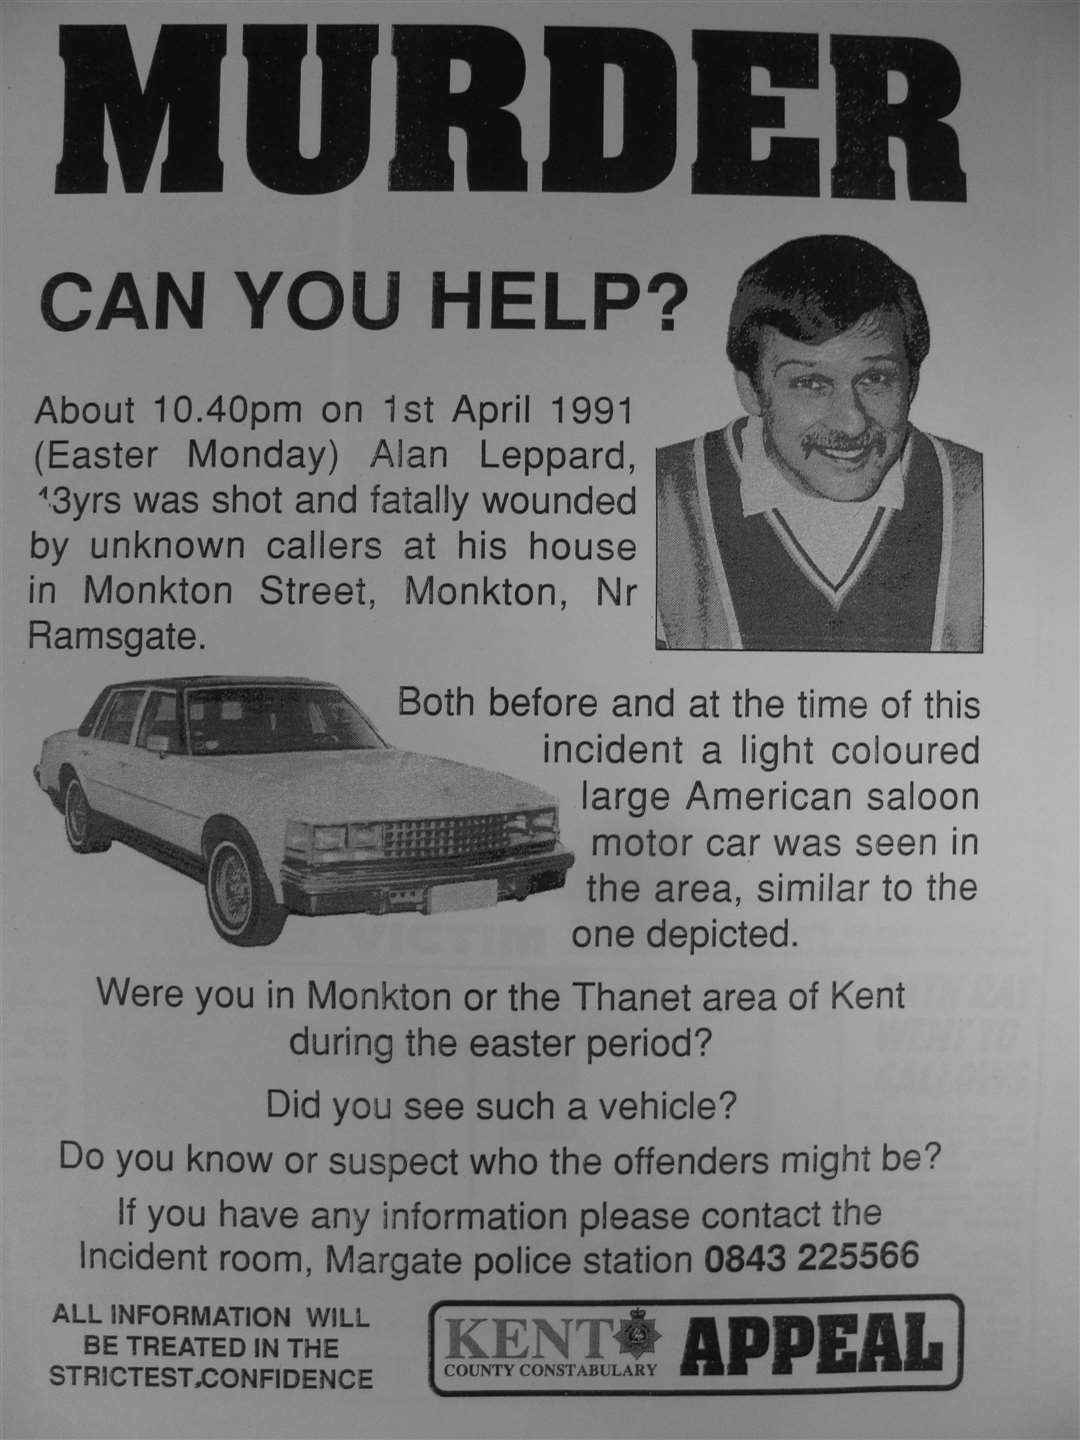 A police appeal poster after the murder of Alan Leppard